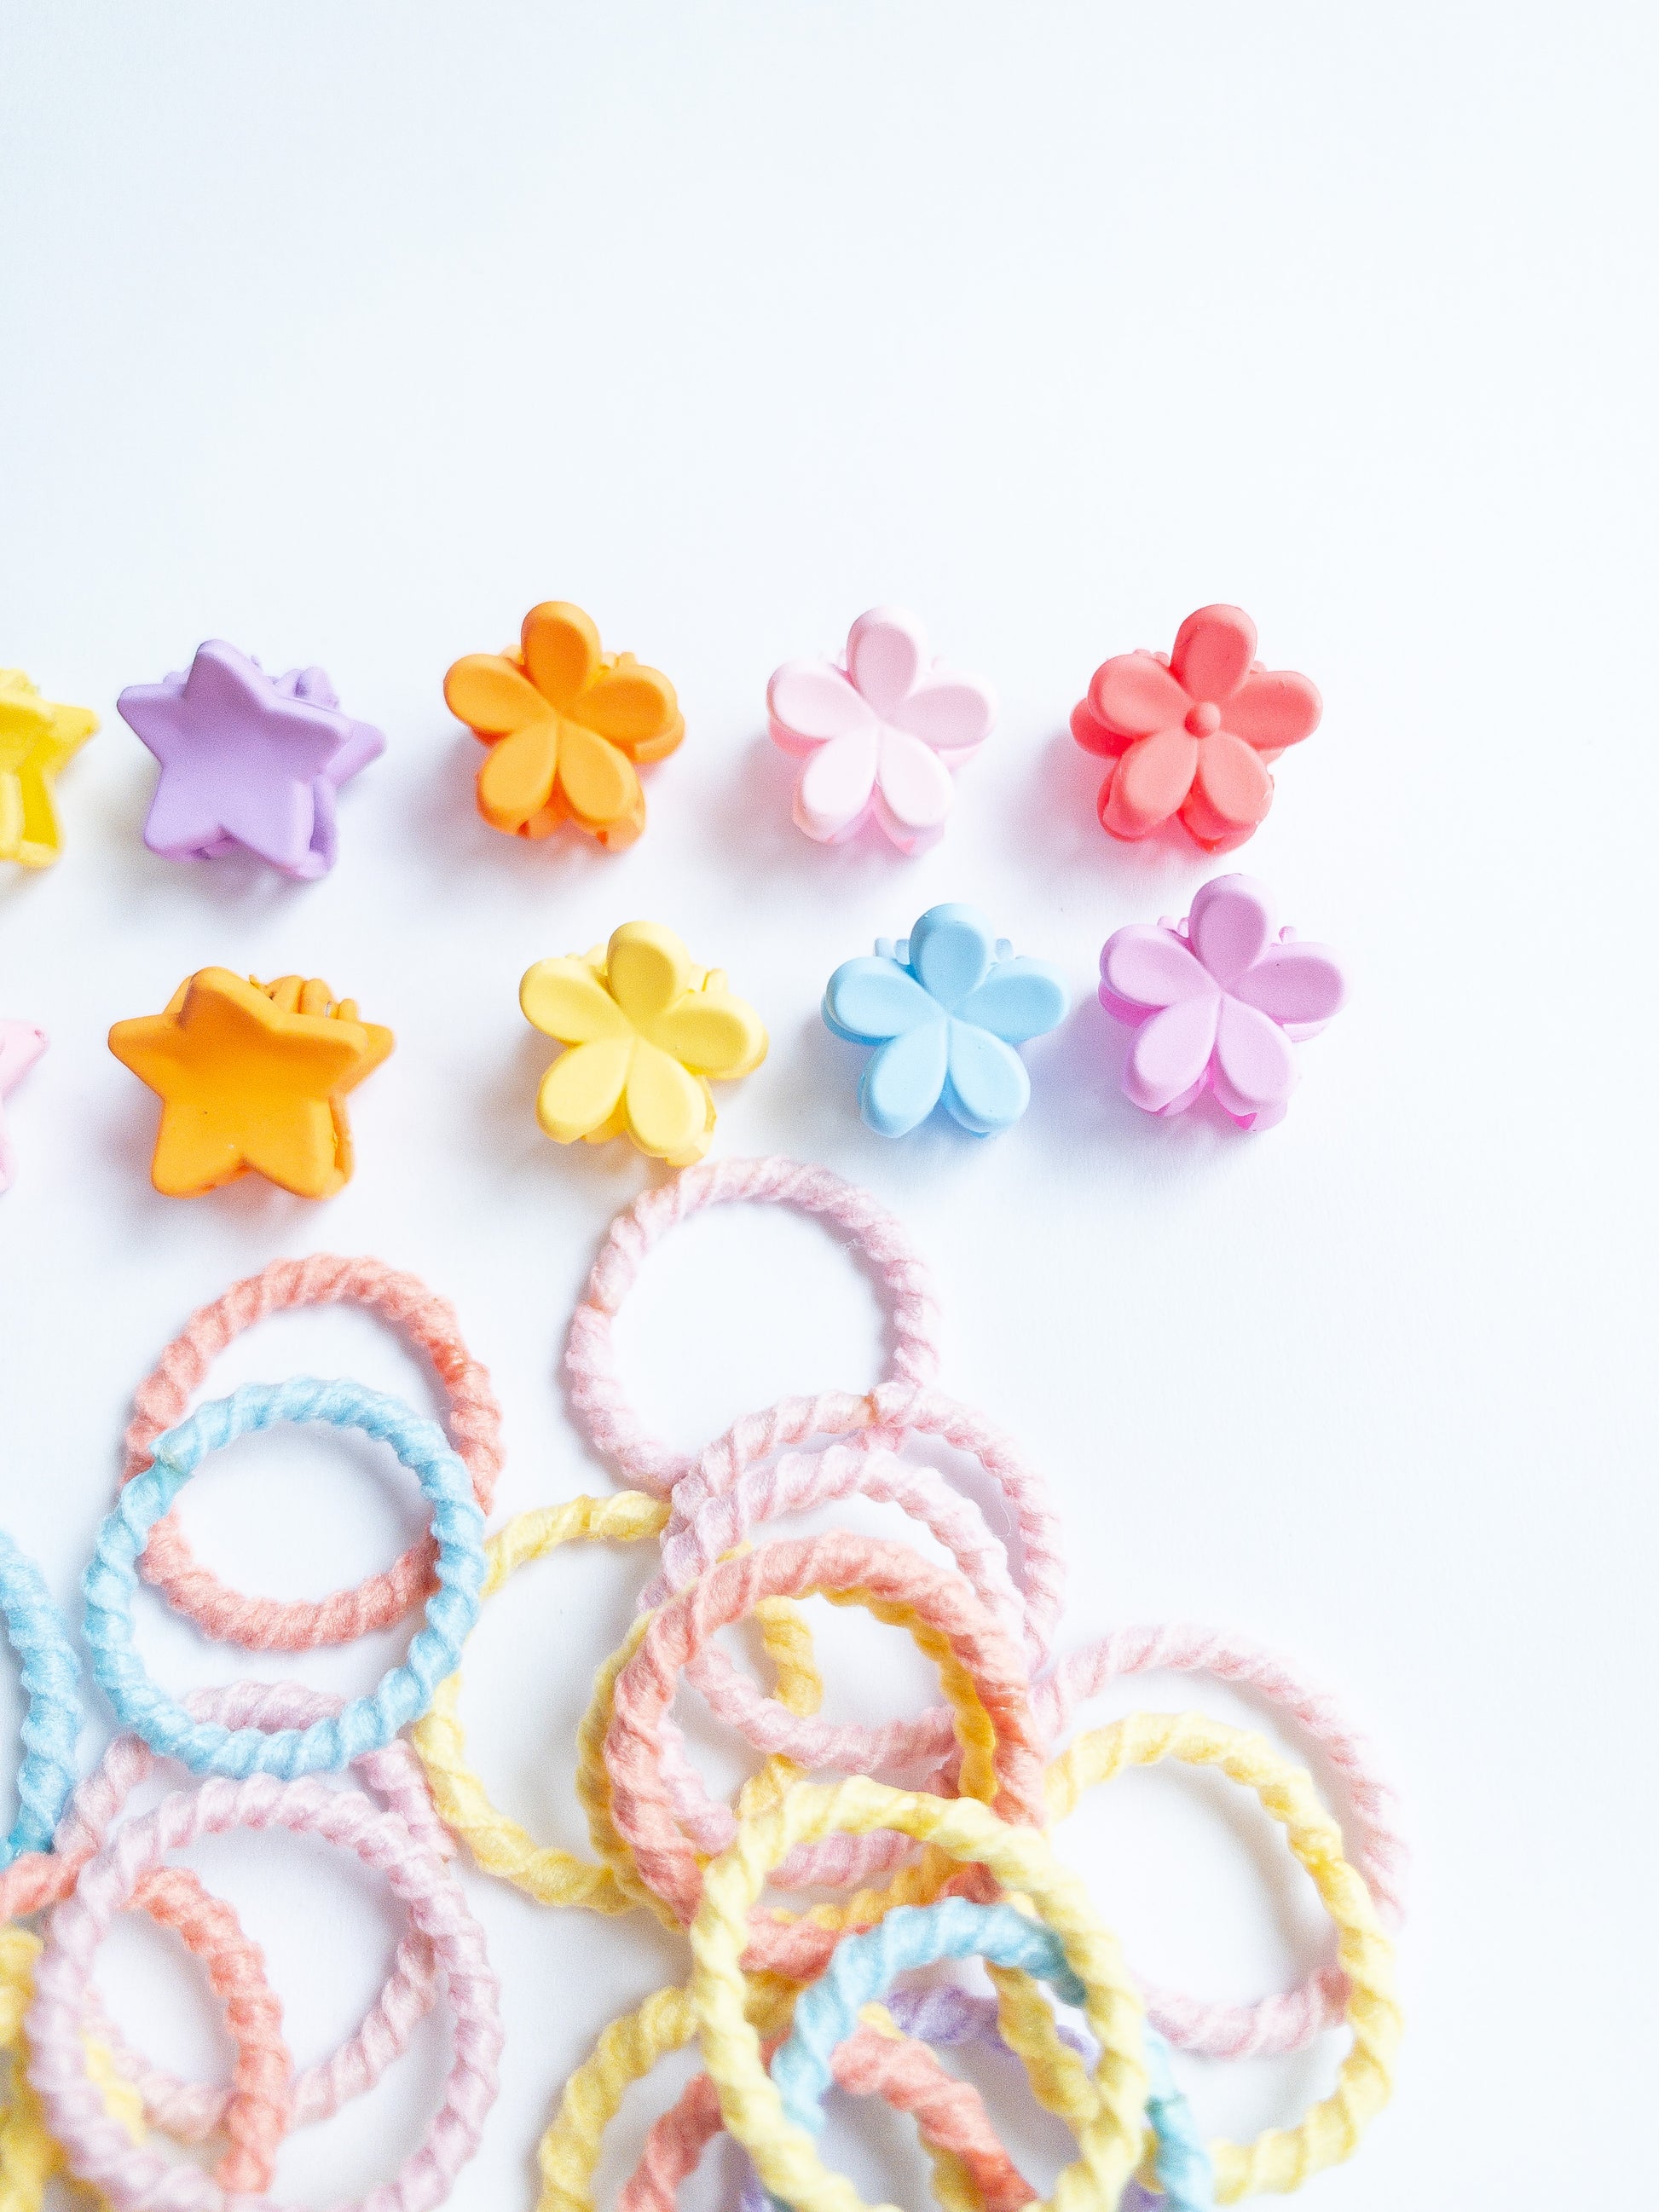 This mini hair claw set is the one you need! A boxed set with a mix of mini flower hair claws and a mix of mini star hair claws along with small hair ties. The hair ties are super soft, no tug and thin, perfect for those cute pigtails or braids. Clip the hair claws throughout to make that fun style.